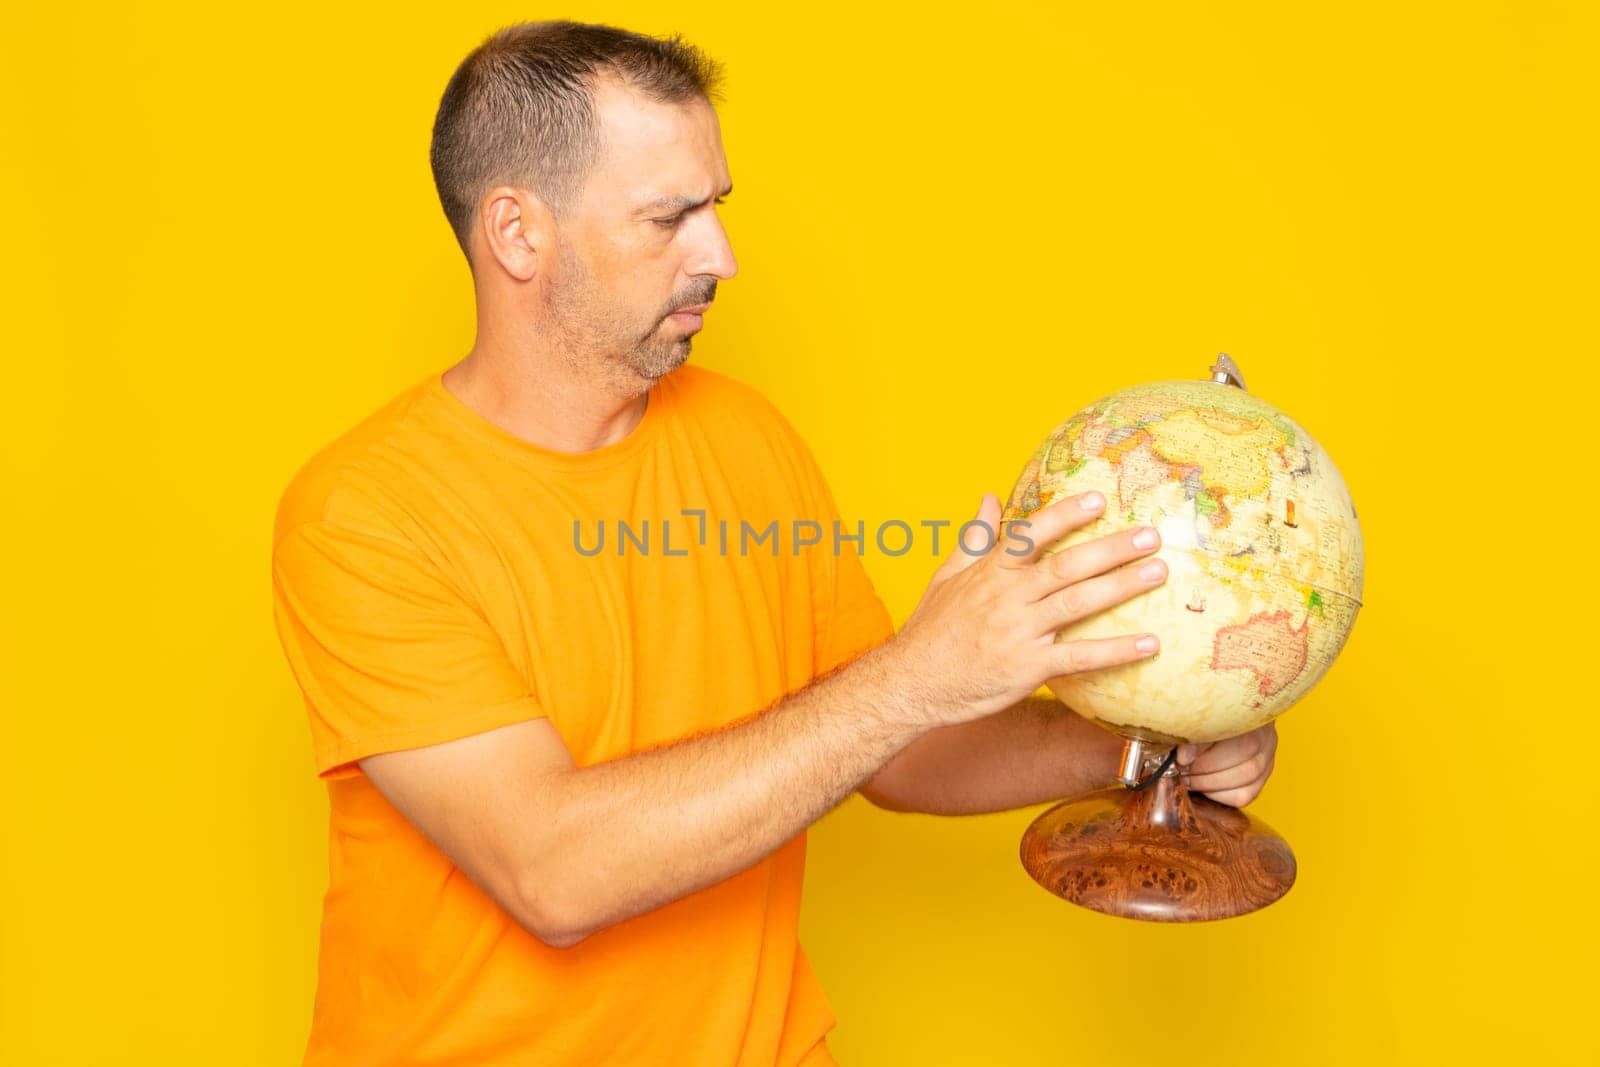 Hispanic man with beard in his 40s searching for a location on a world globe, isolated on yellow background